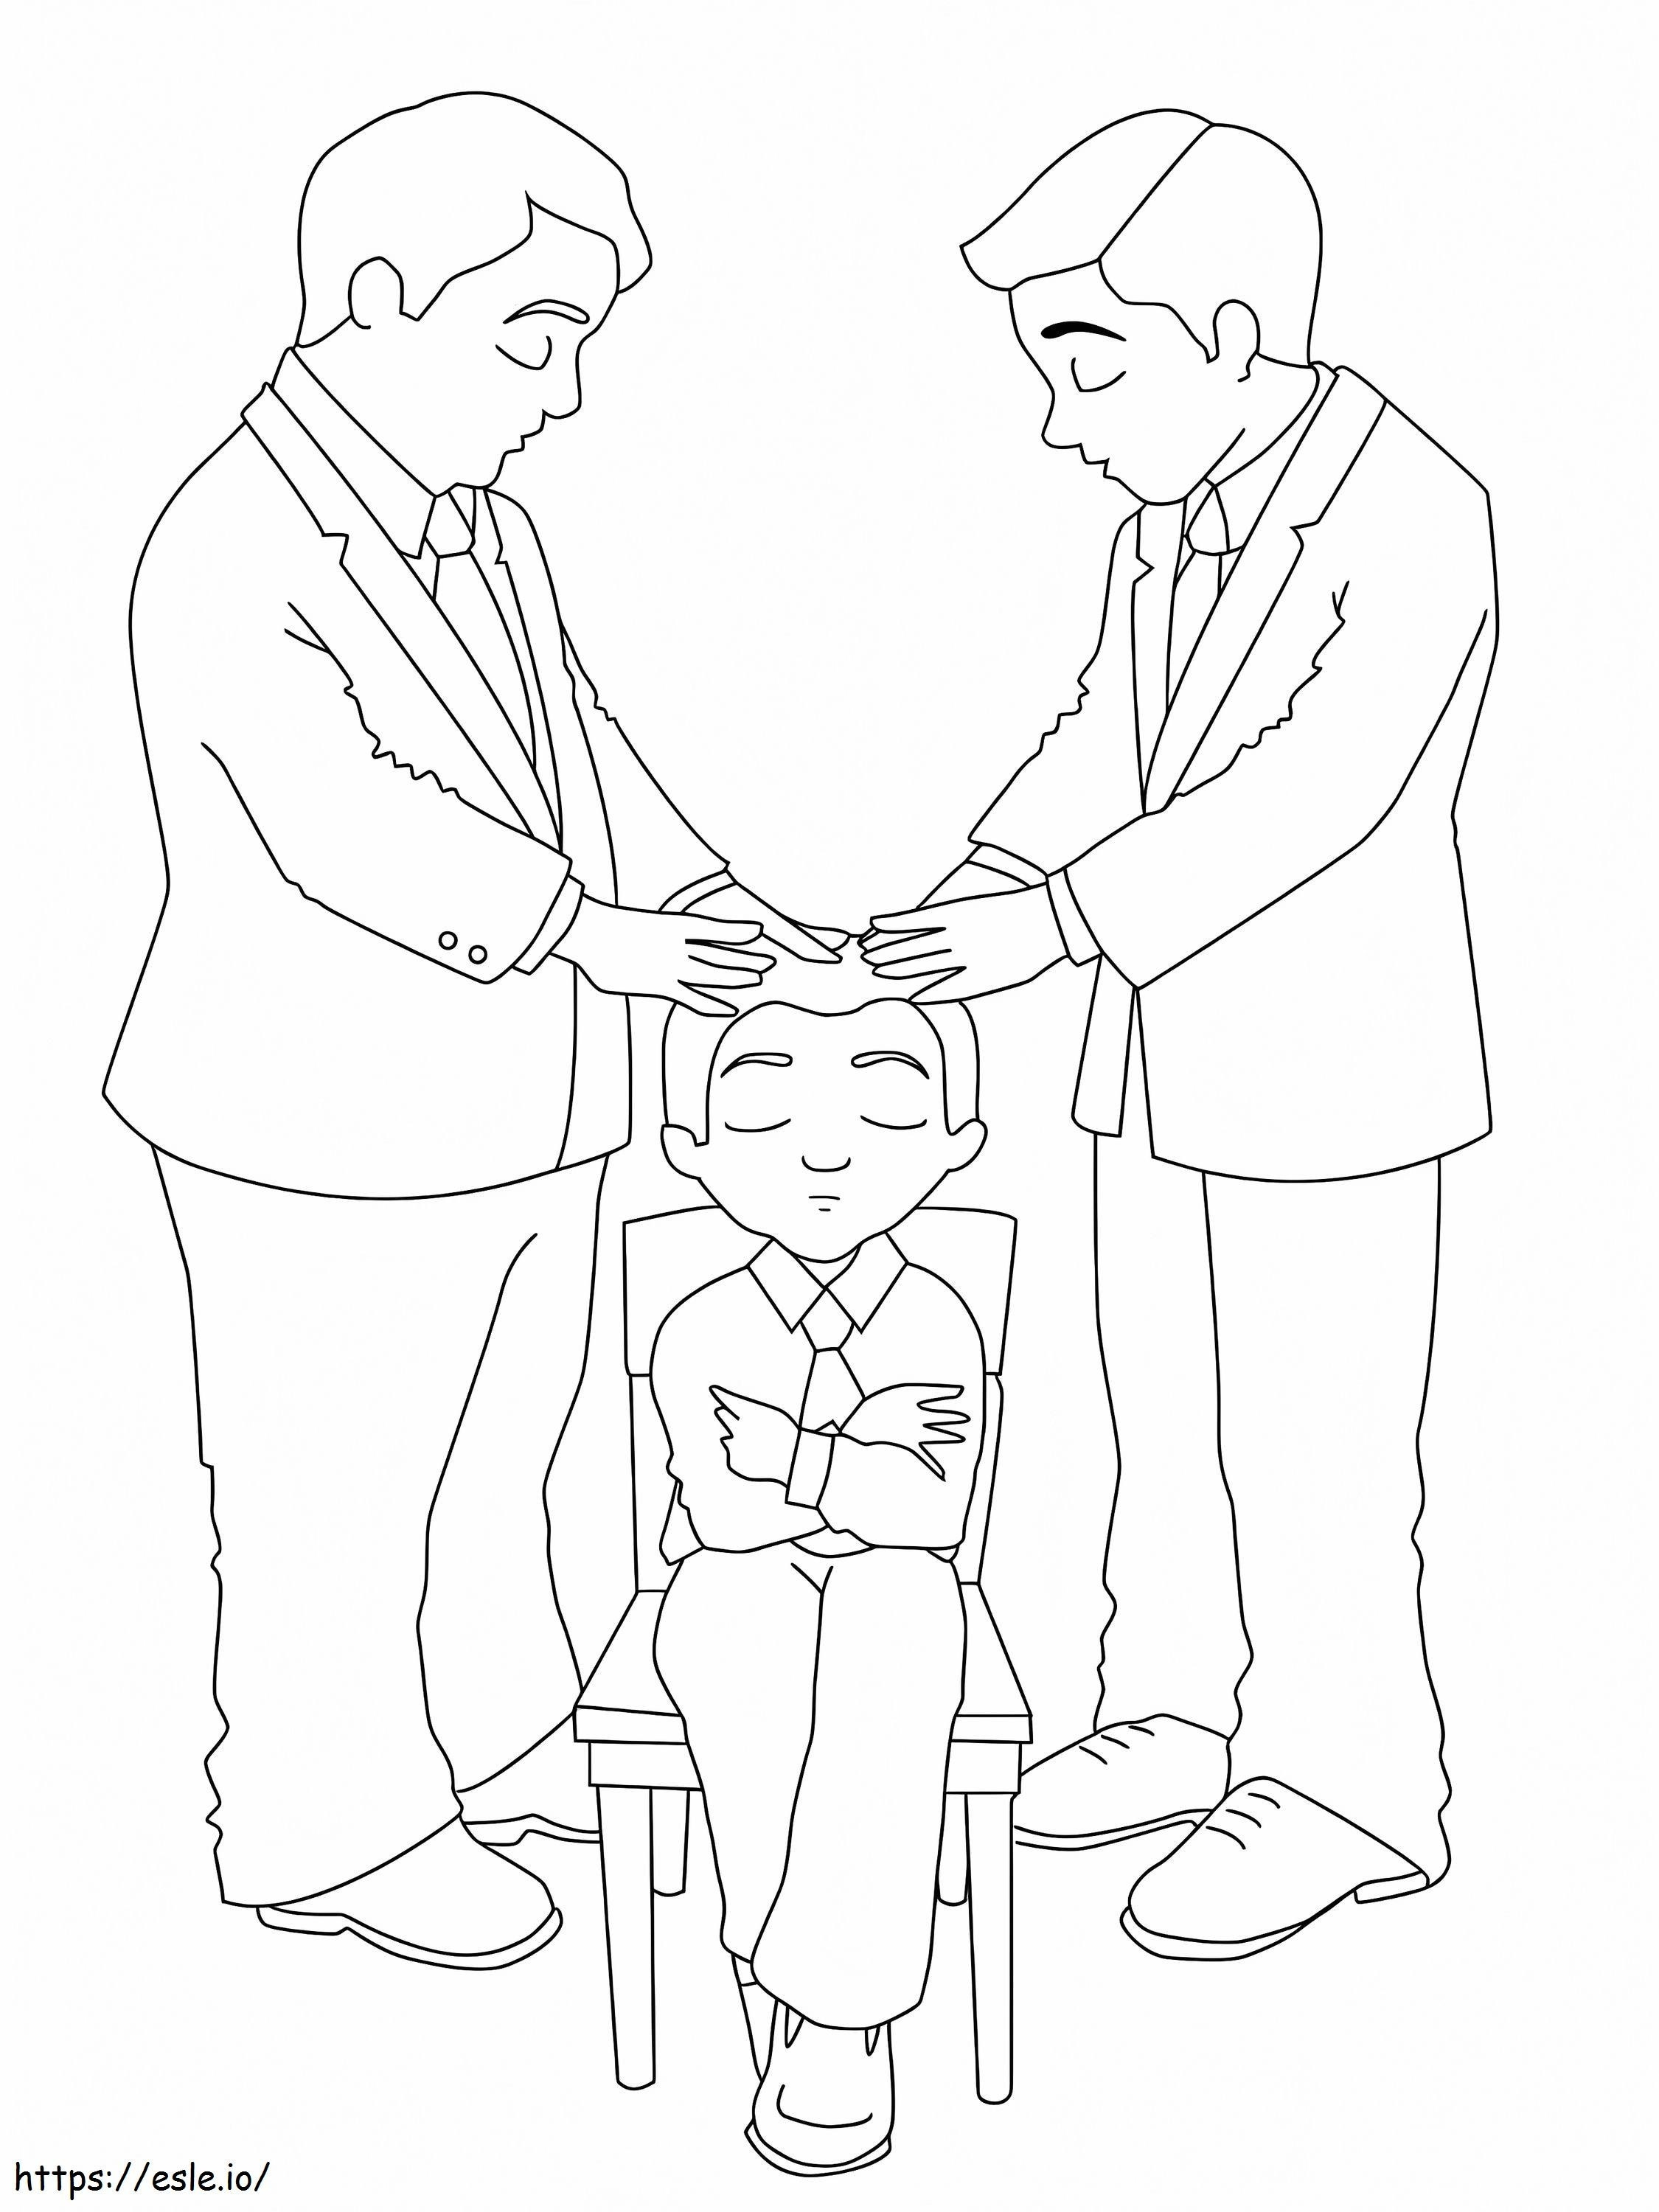 Young Boy Confirmation coloring page